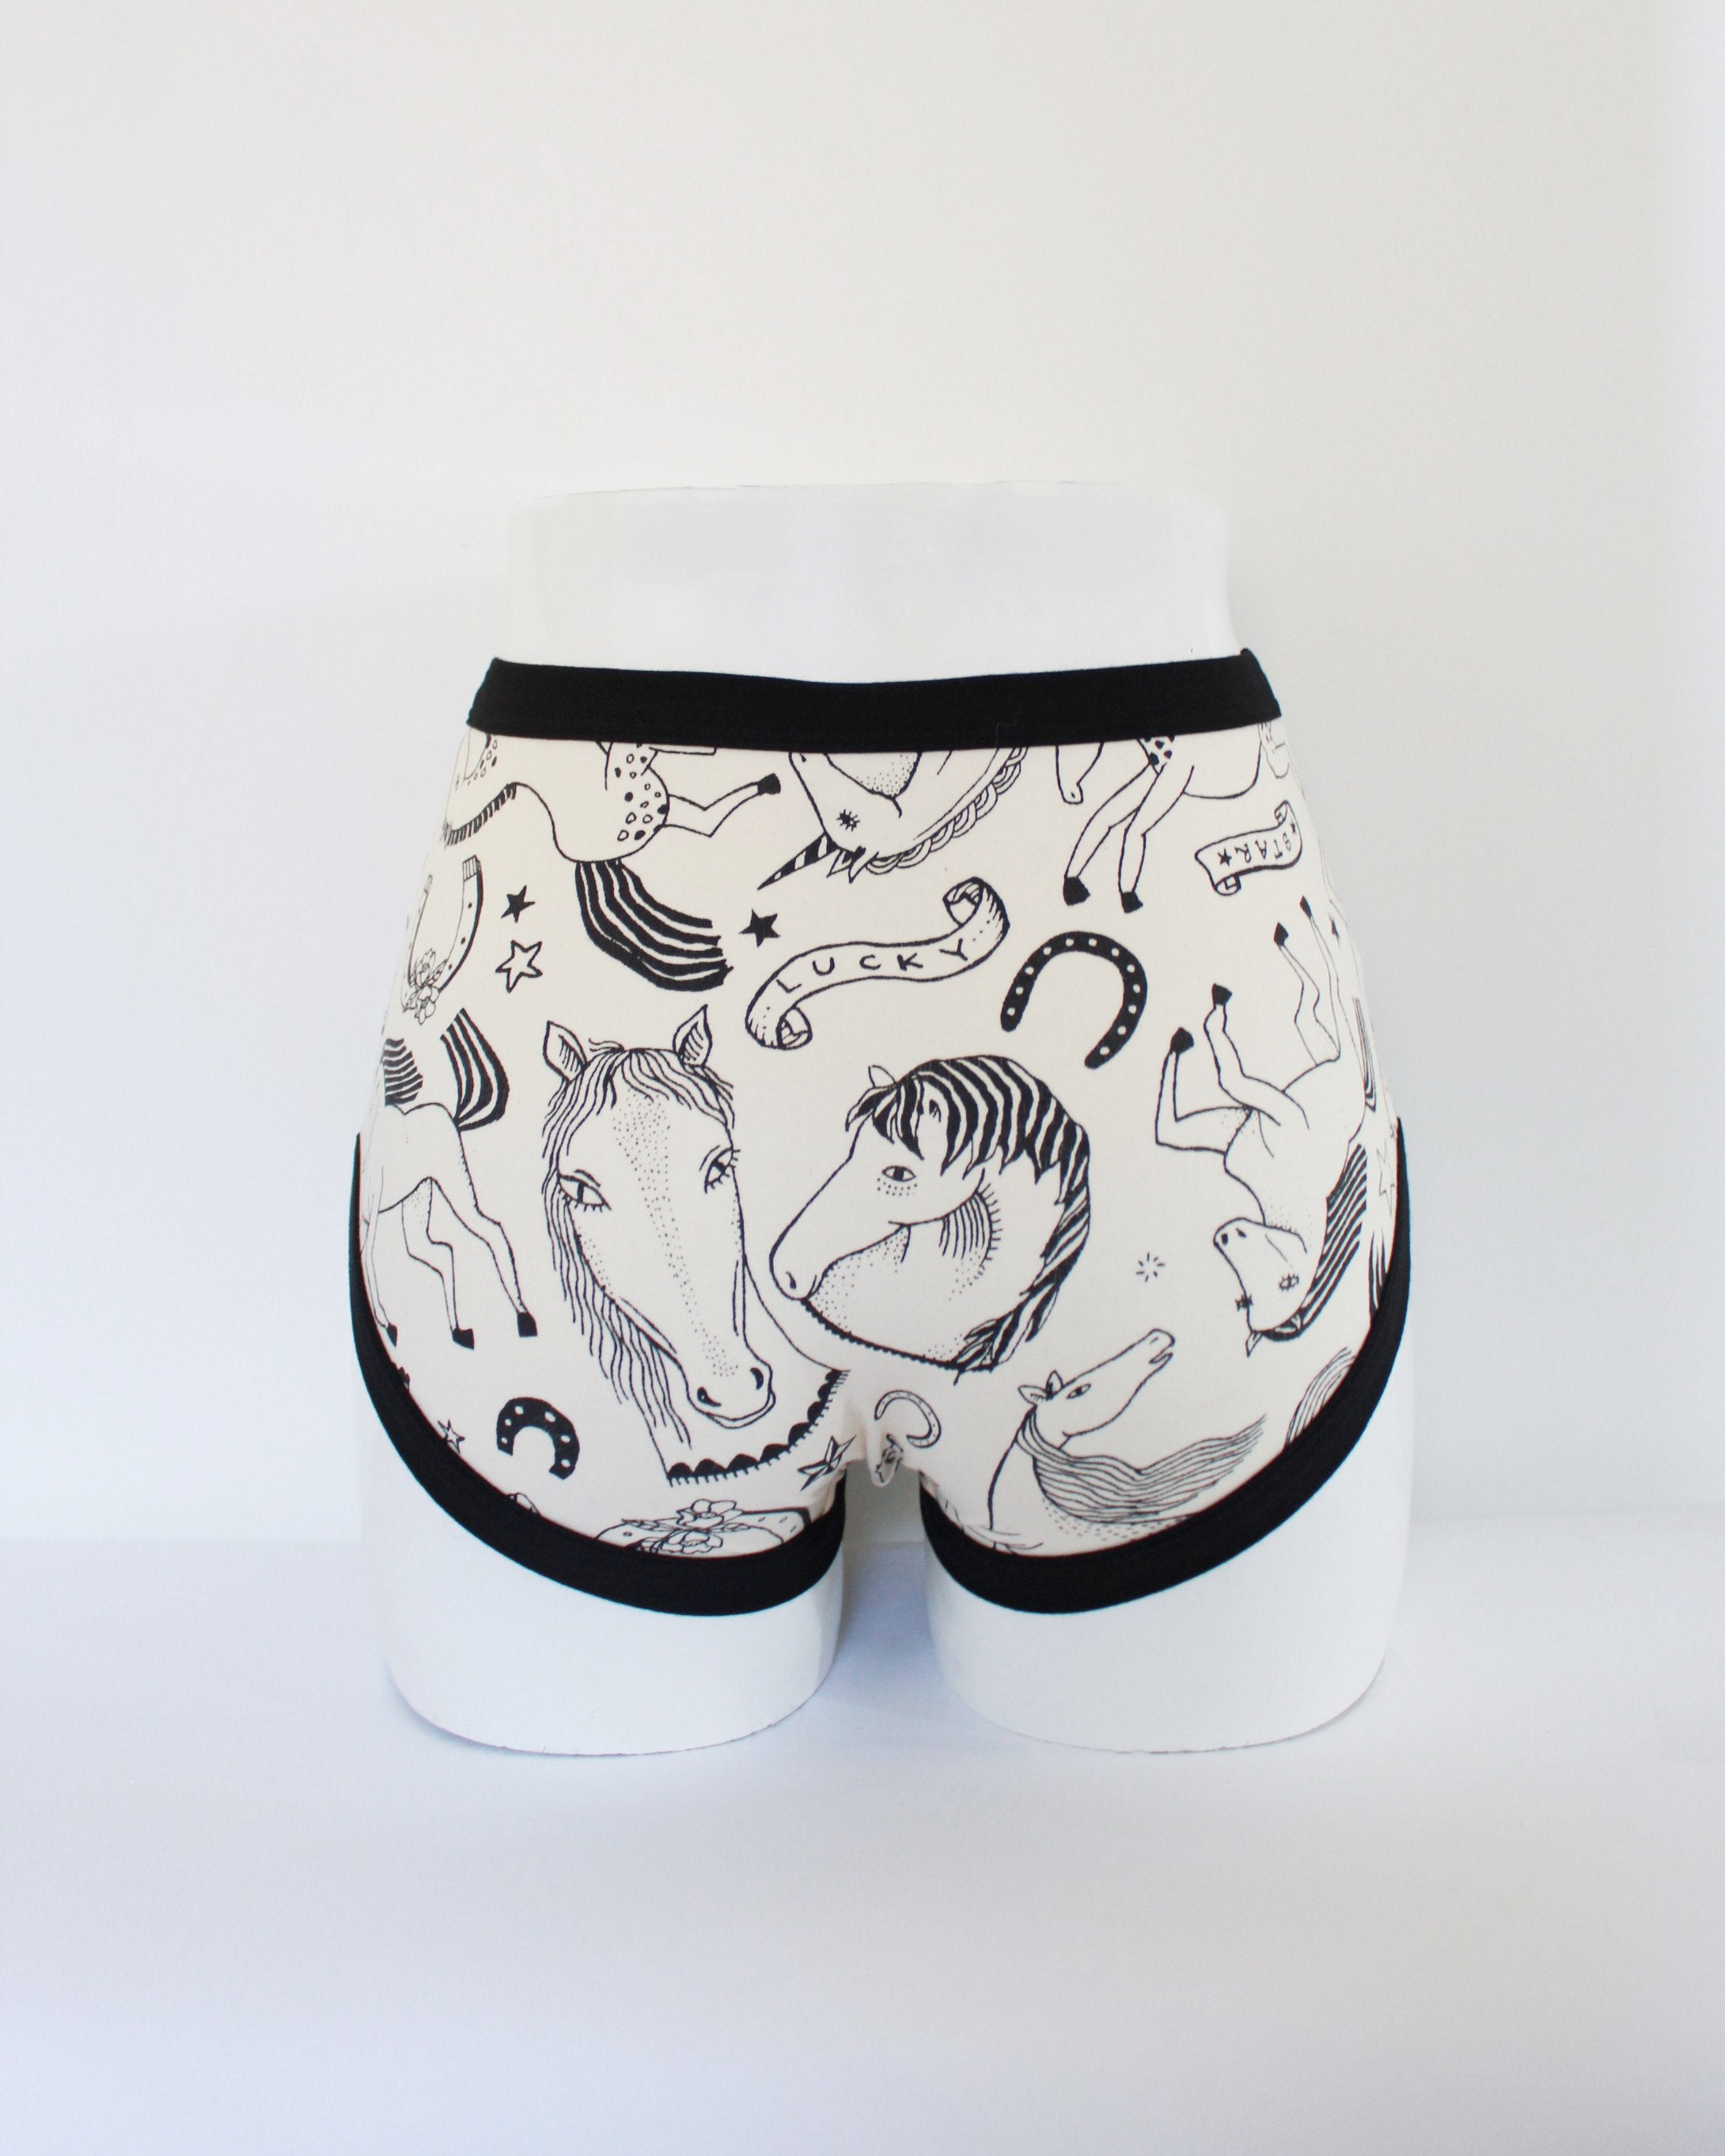 Back of Thunderpants organic cotton Original Panel Pant style underwear in a black and white horses print shown on mannequin bum and legs.